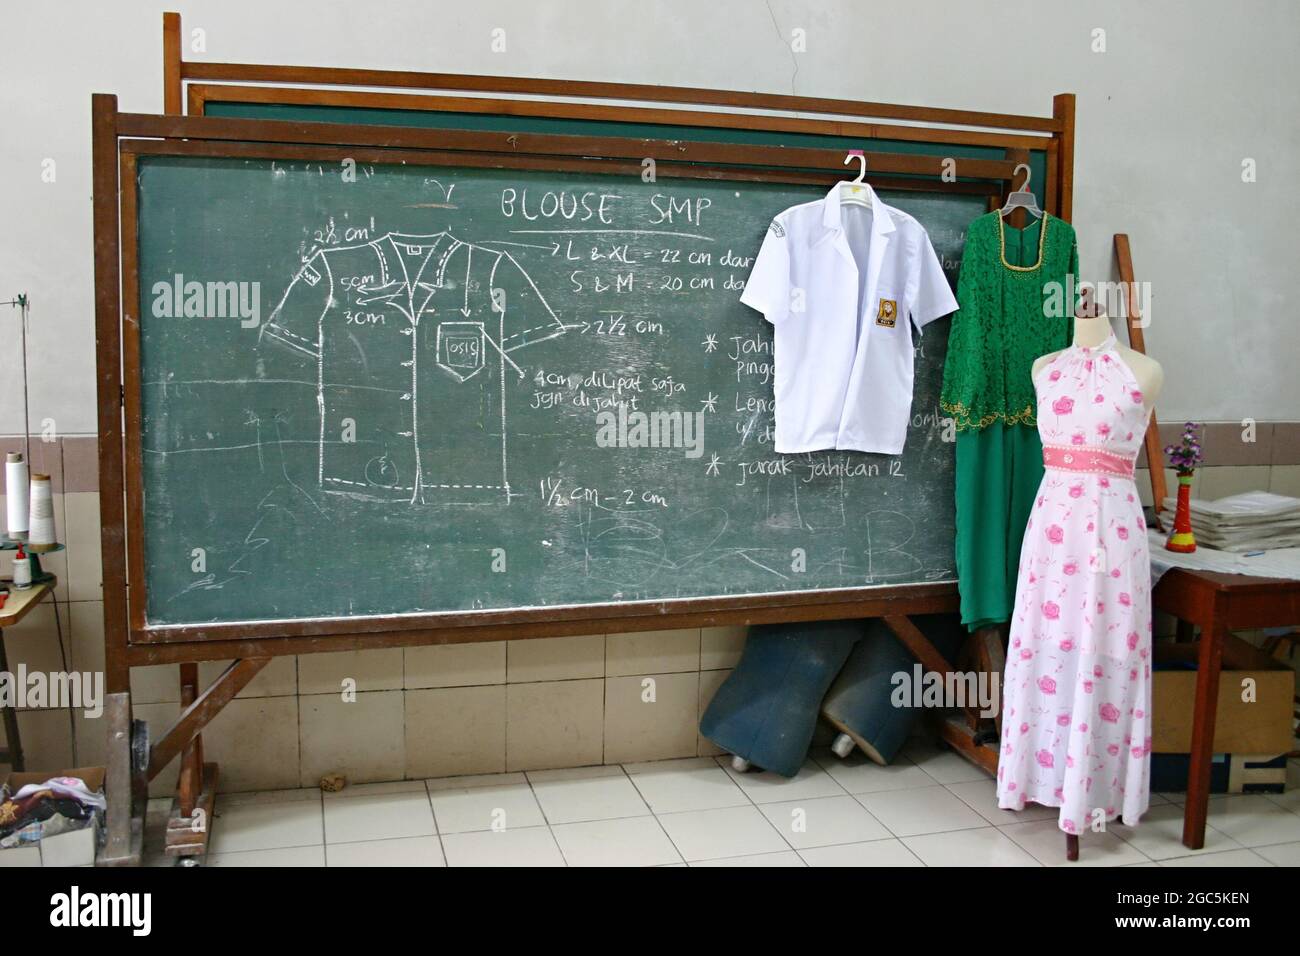 A green chalkboard with sewing instructions and some clothing samples in a classroom. Stock Photo